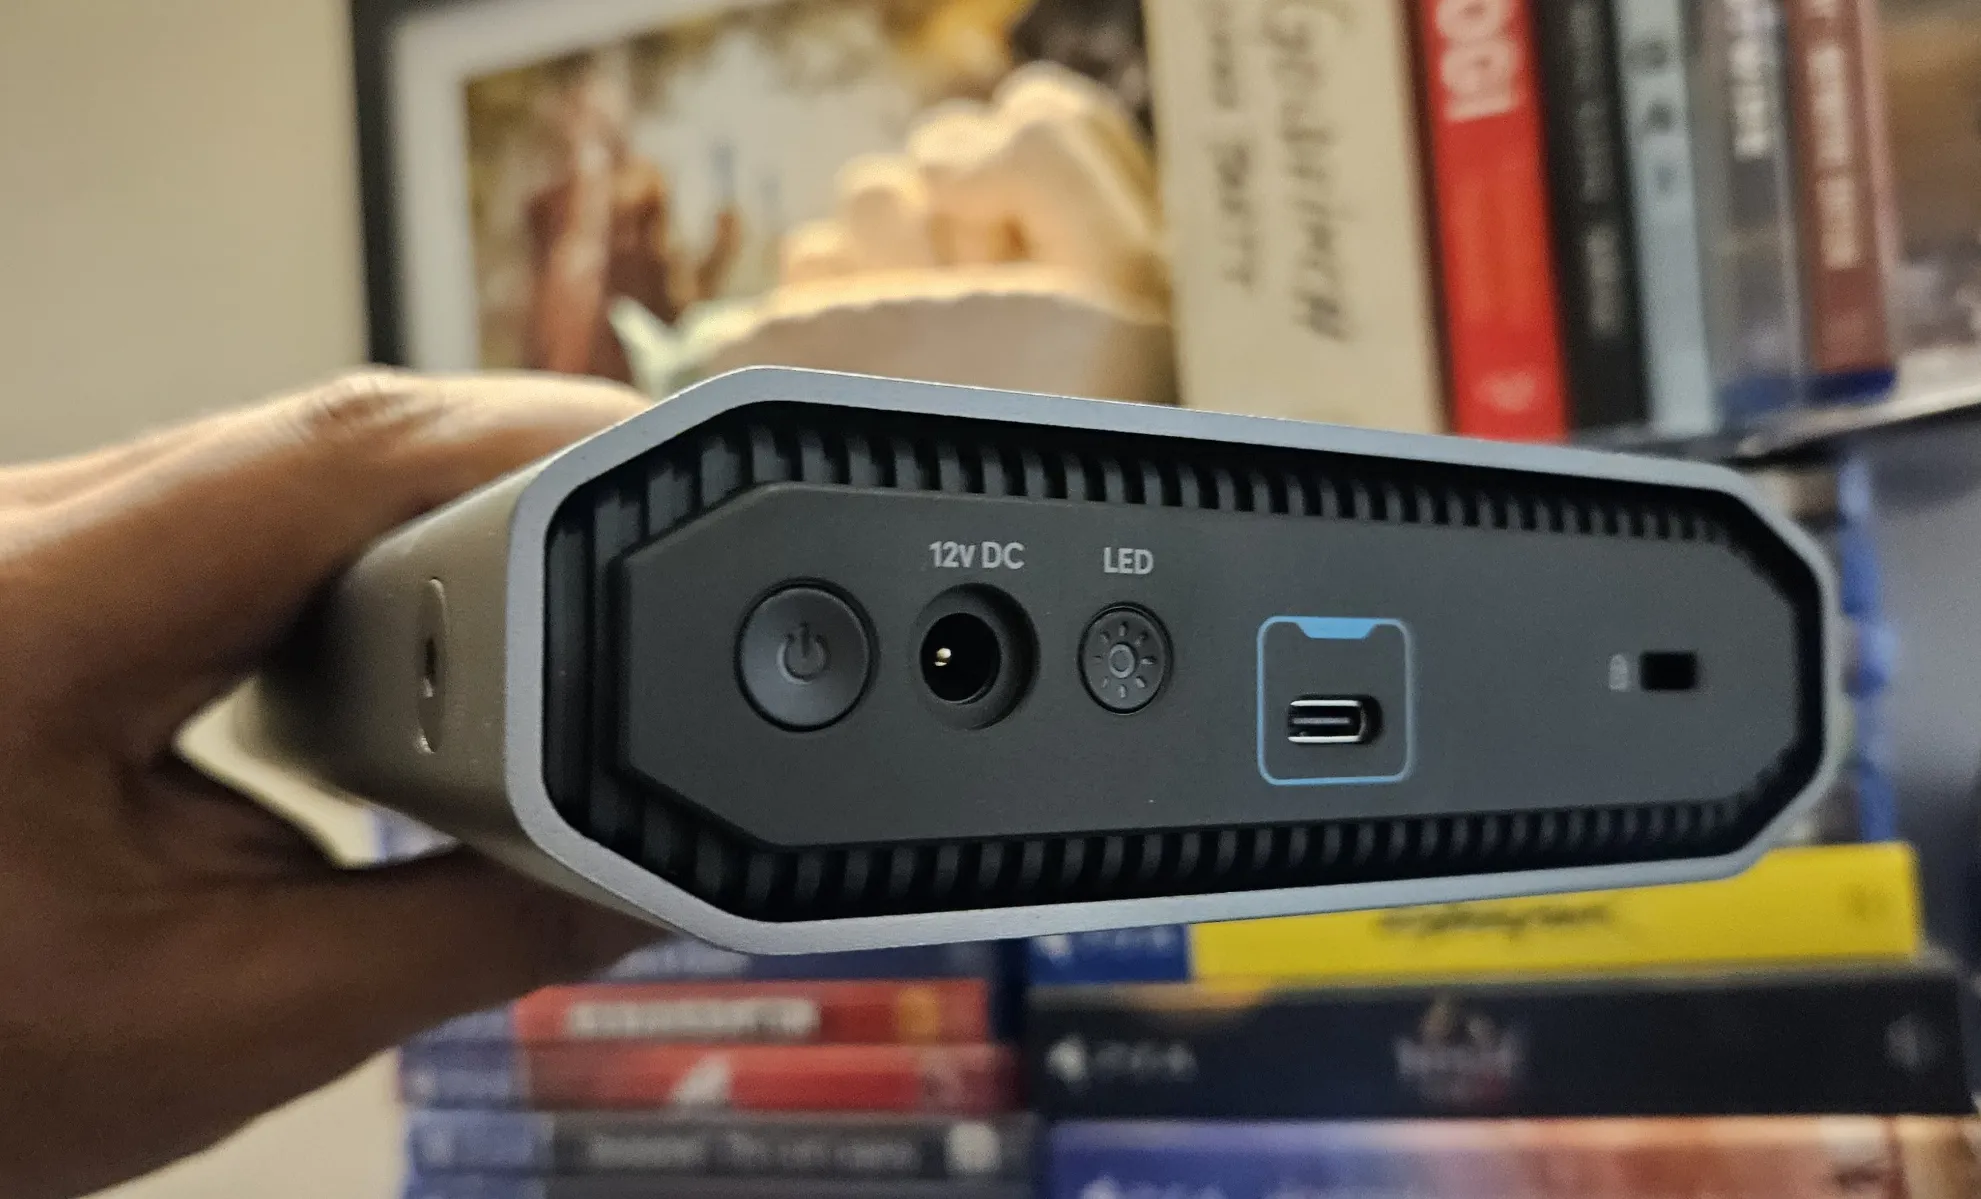 The SanDisk Professional G-Drive uses a USB 3.2 Gen 2 interface.